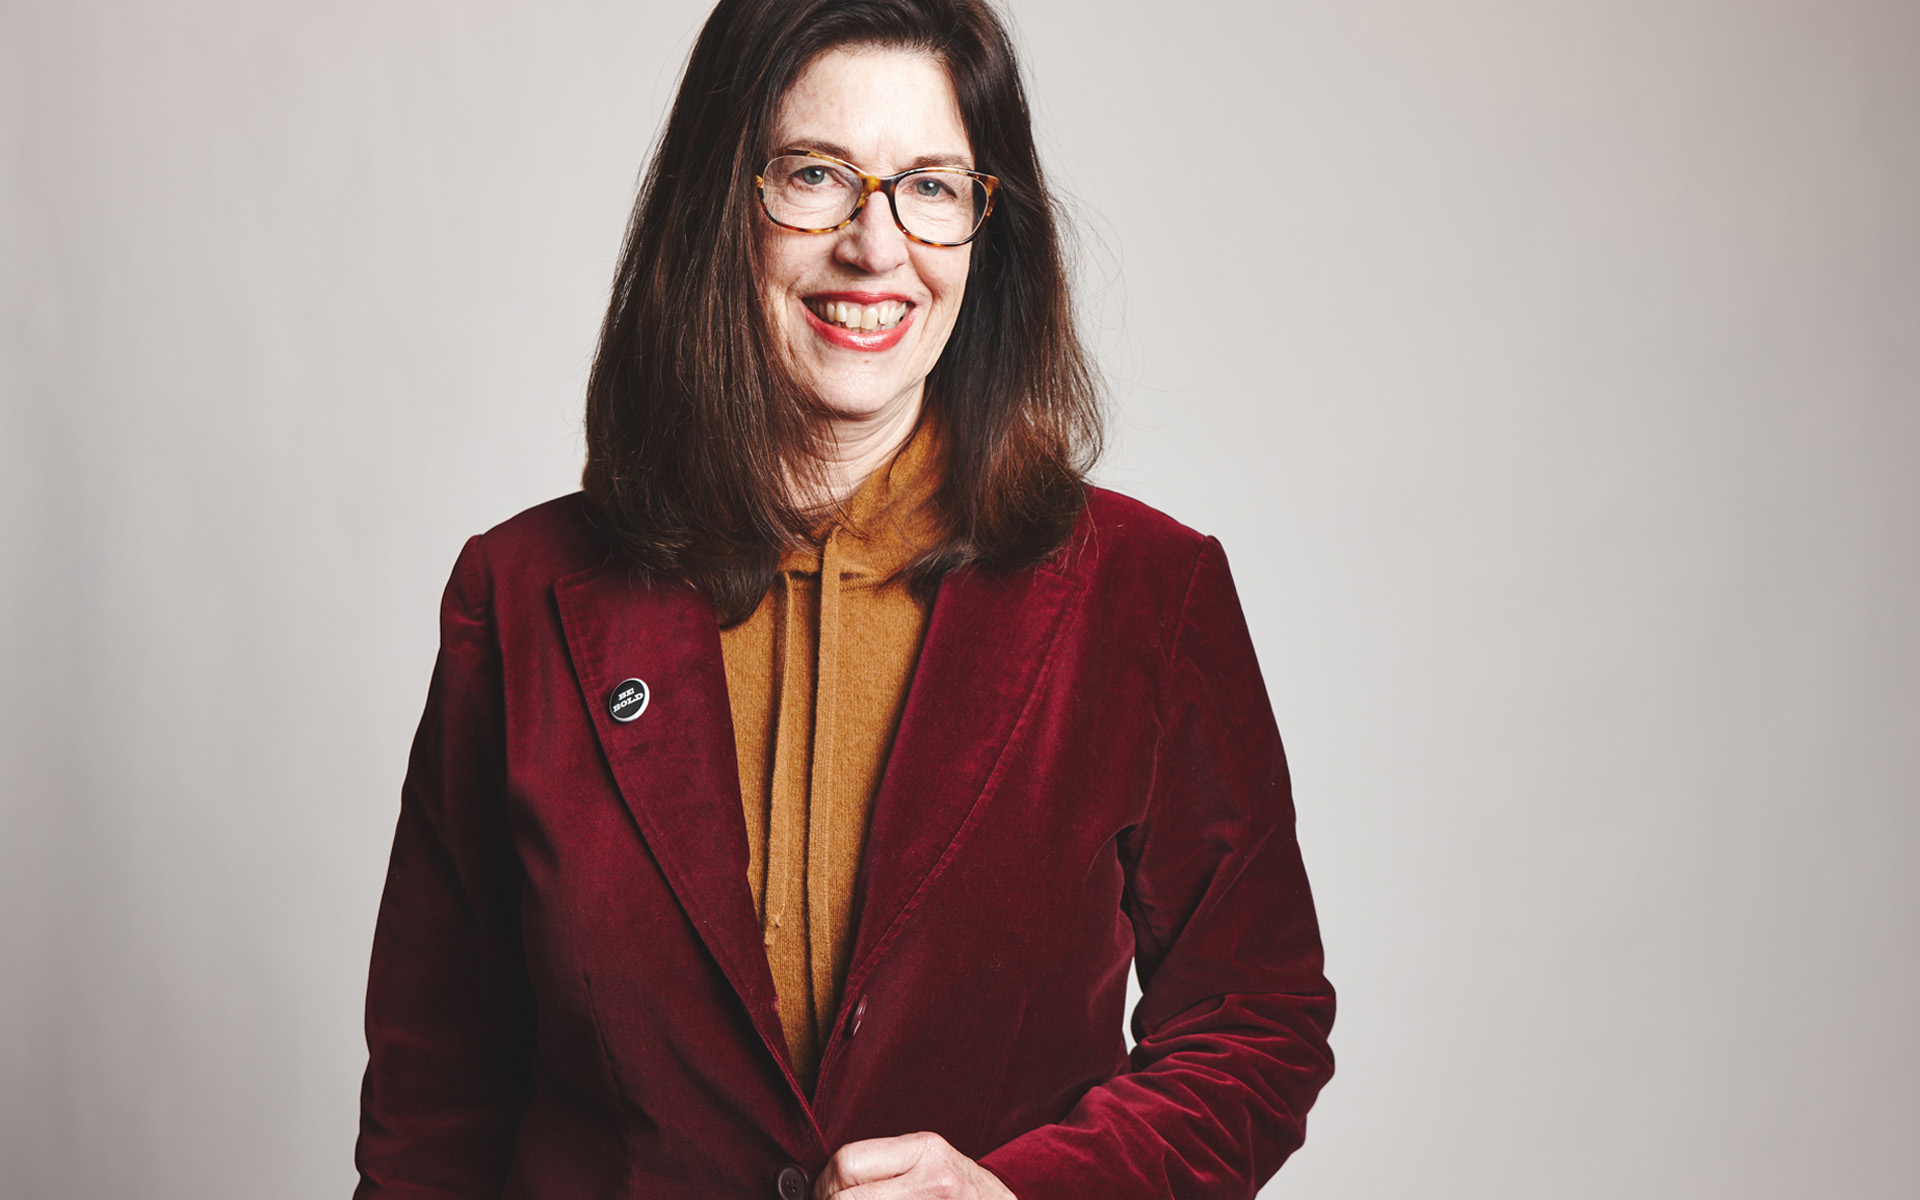 Psychoacoustics in Music Production course author Susan Rogers is pictured in a burgundy blazer.